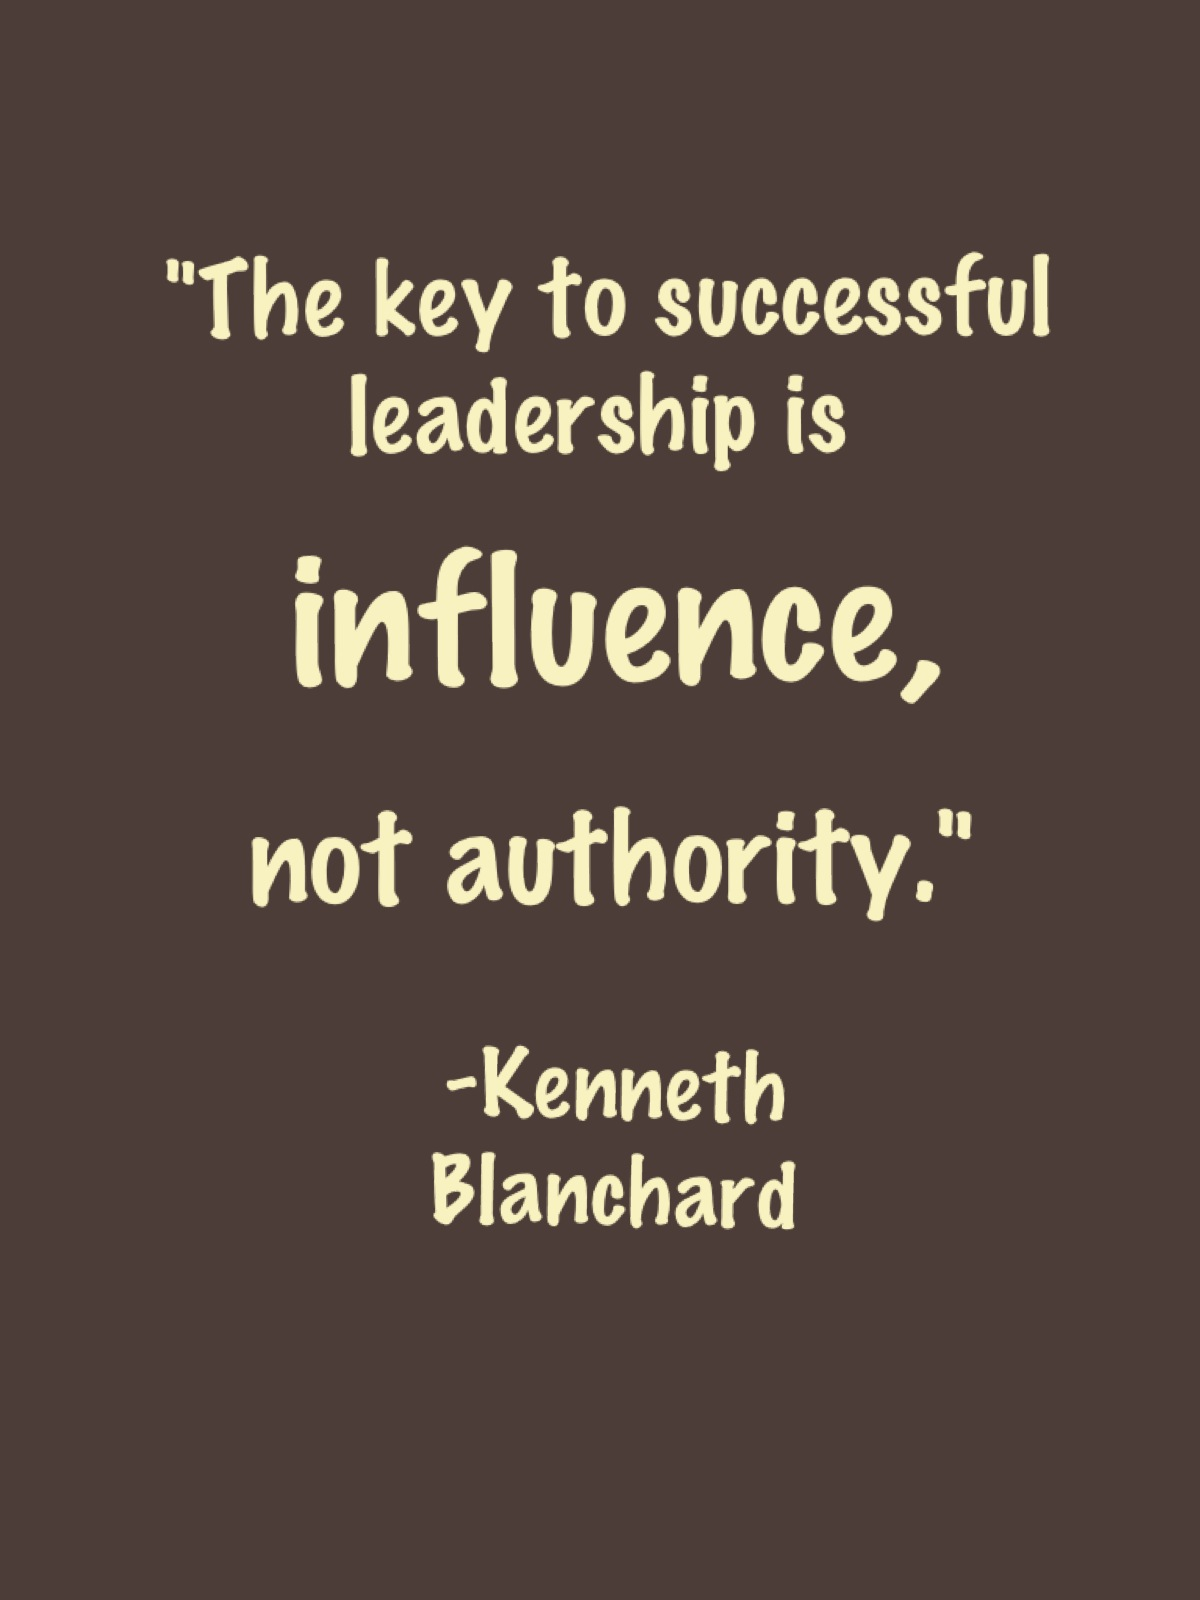 Band Leadership Quotes. QuotesGram